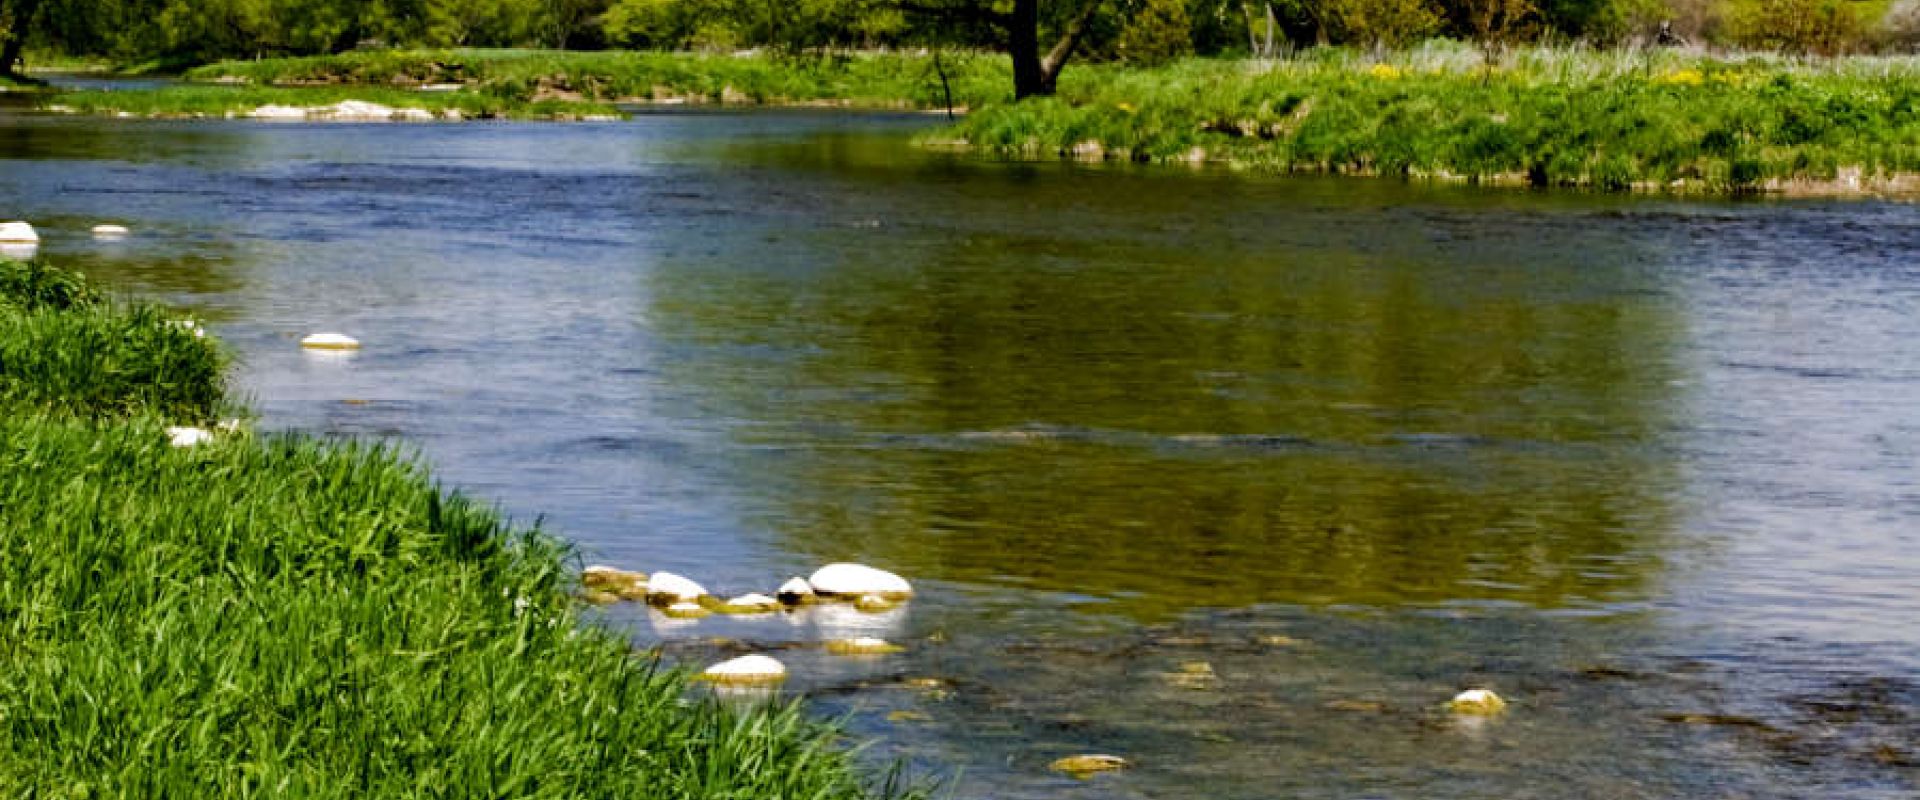 A pastoral scene of the Grand River's shallow waters.